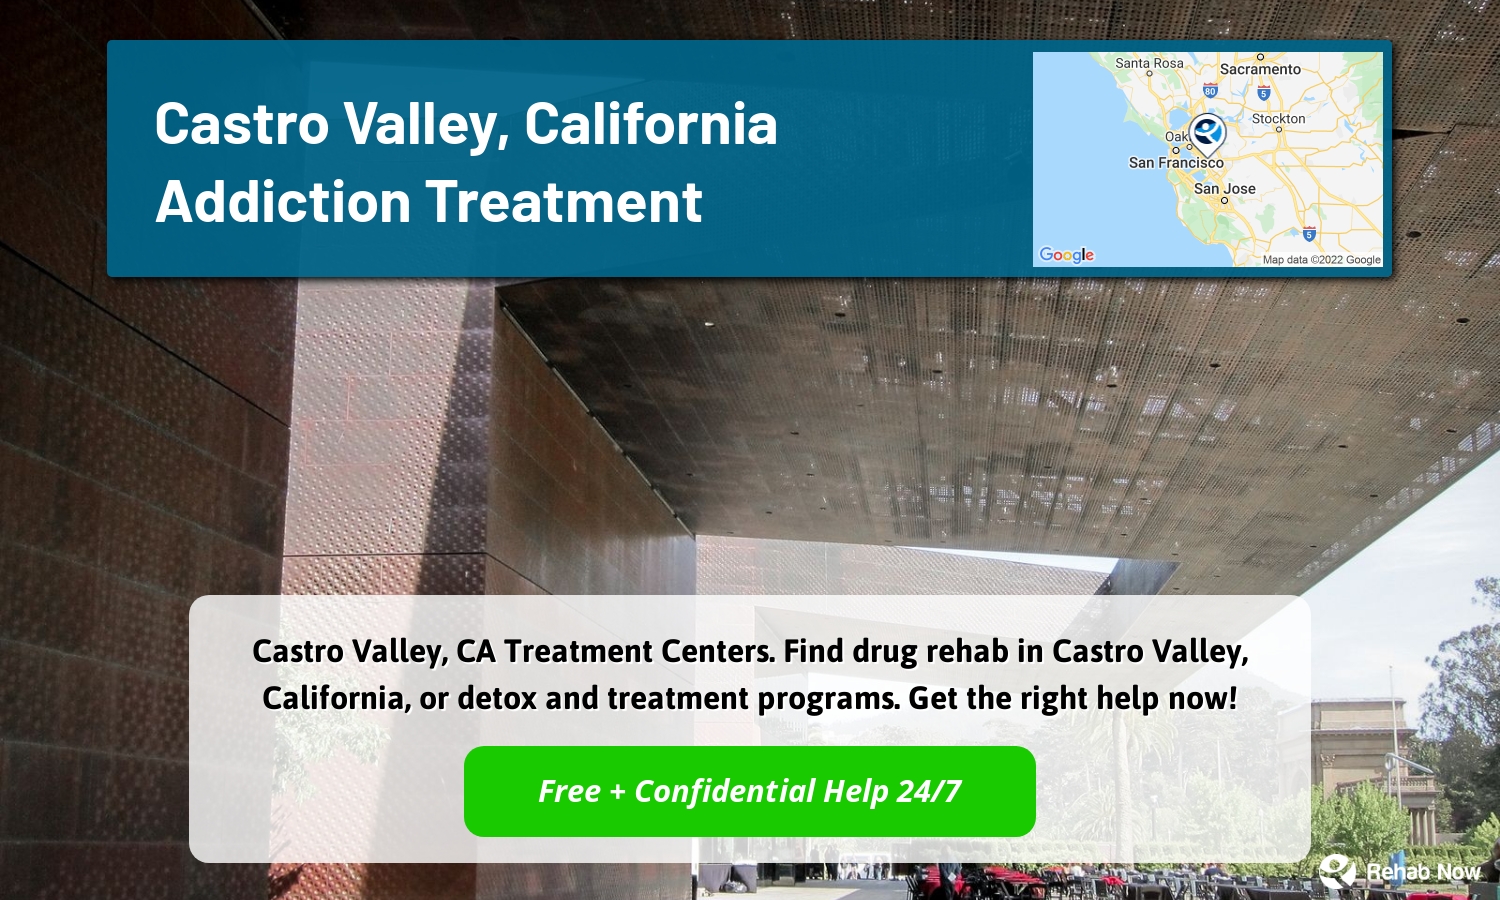 Castro Valley, CA Treatment Centers. Find drug rehab in Castro Valley, California, or detox and treatment programs. Get the right help now!